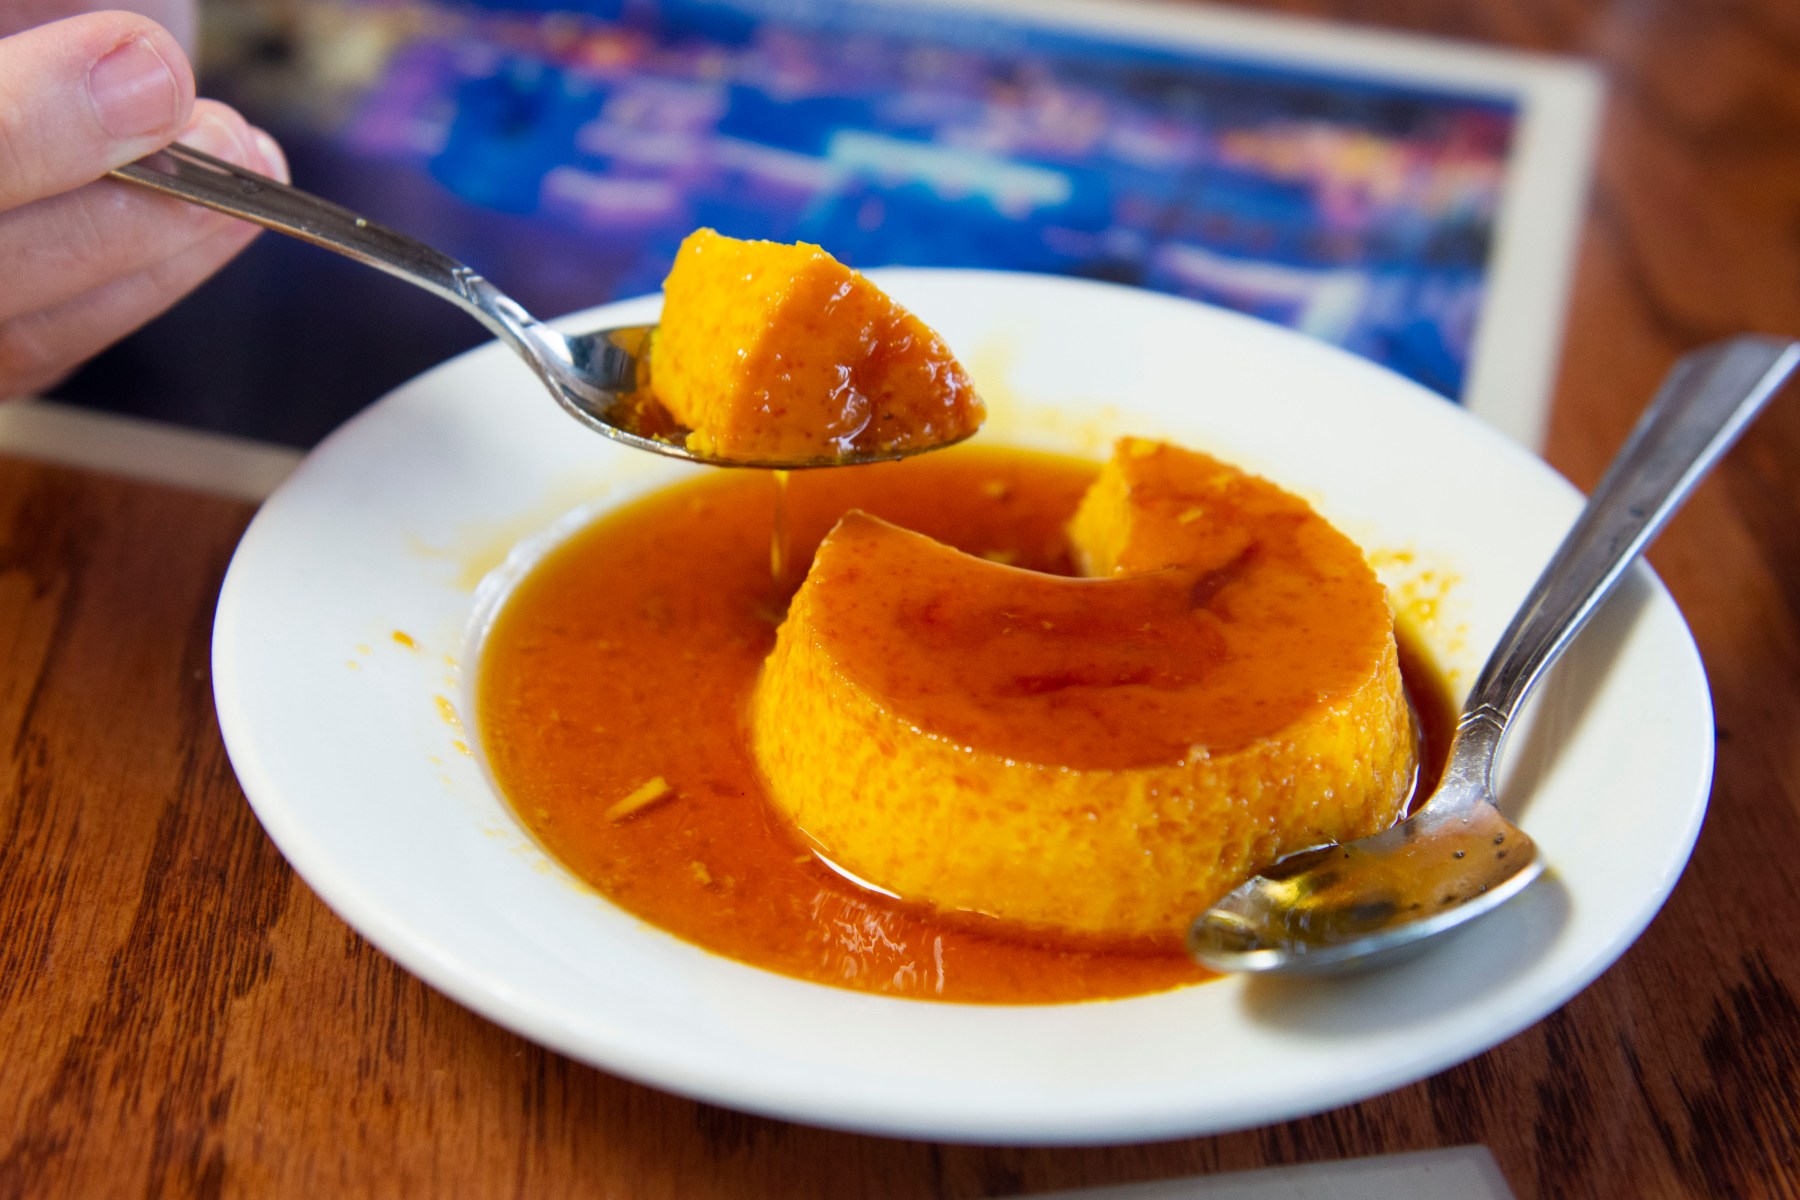 And actually, we do have room. Because how can you leave an iconic Cuban restaurant without trying<br>their flan? It arrives in all of its ooey, gooey, caramel-y goodness, and while we say “Just one spoonful!”<br>we know we’re lying to each other. It’s too good to resist, jiggling first on the plate then floating on our<br>tongues.